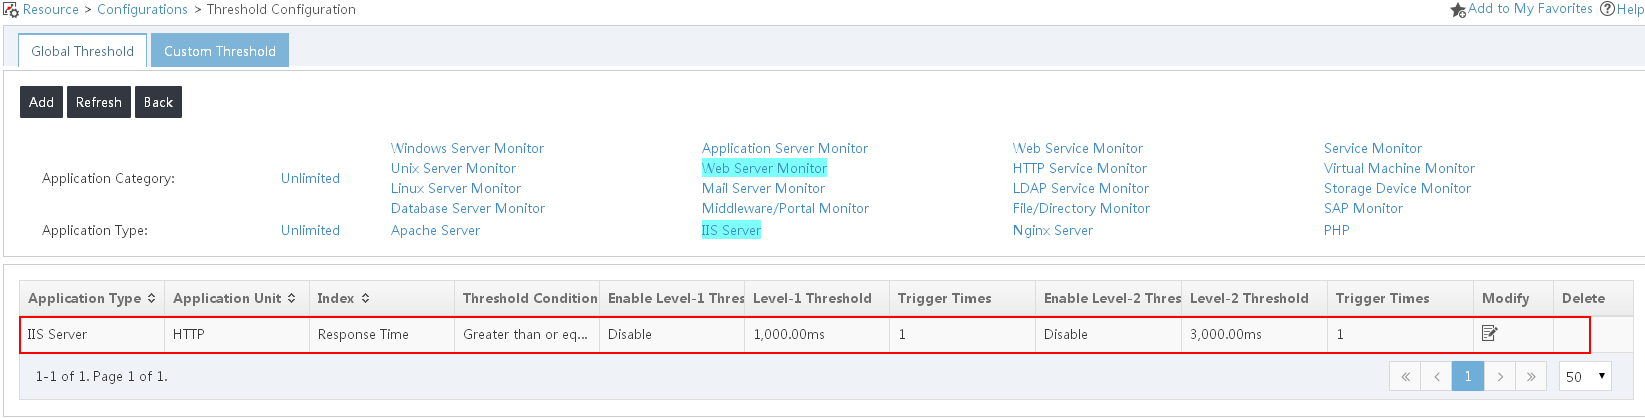 Configuring global thresholds for the server application monitor